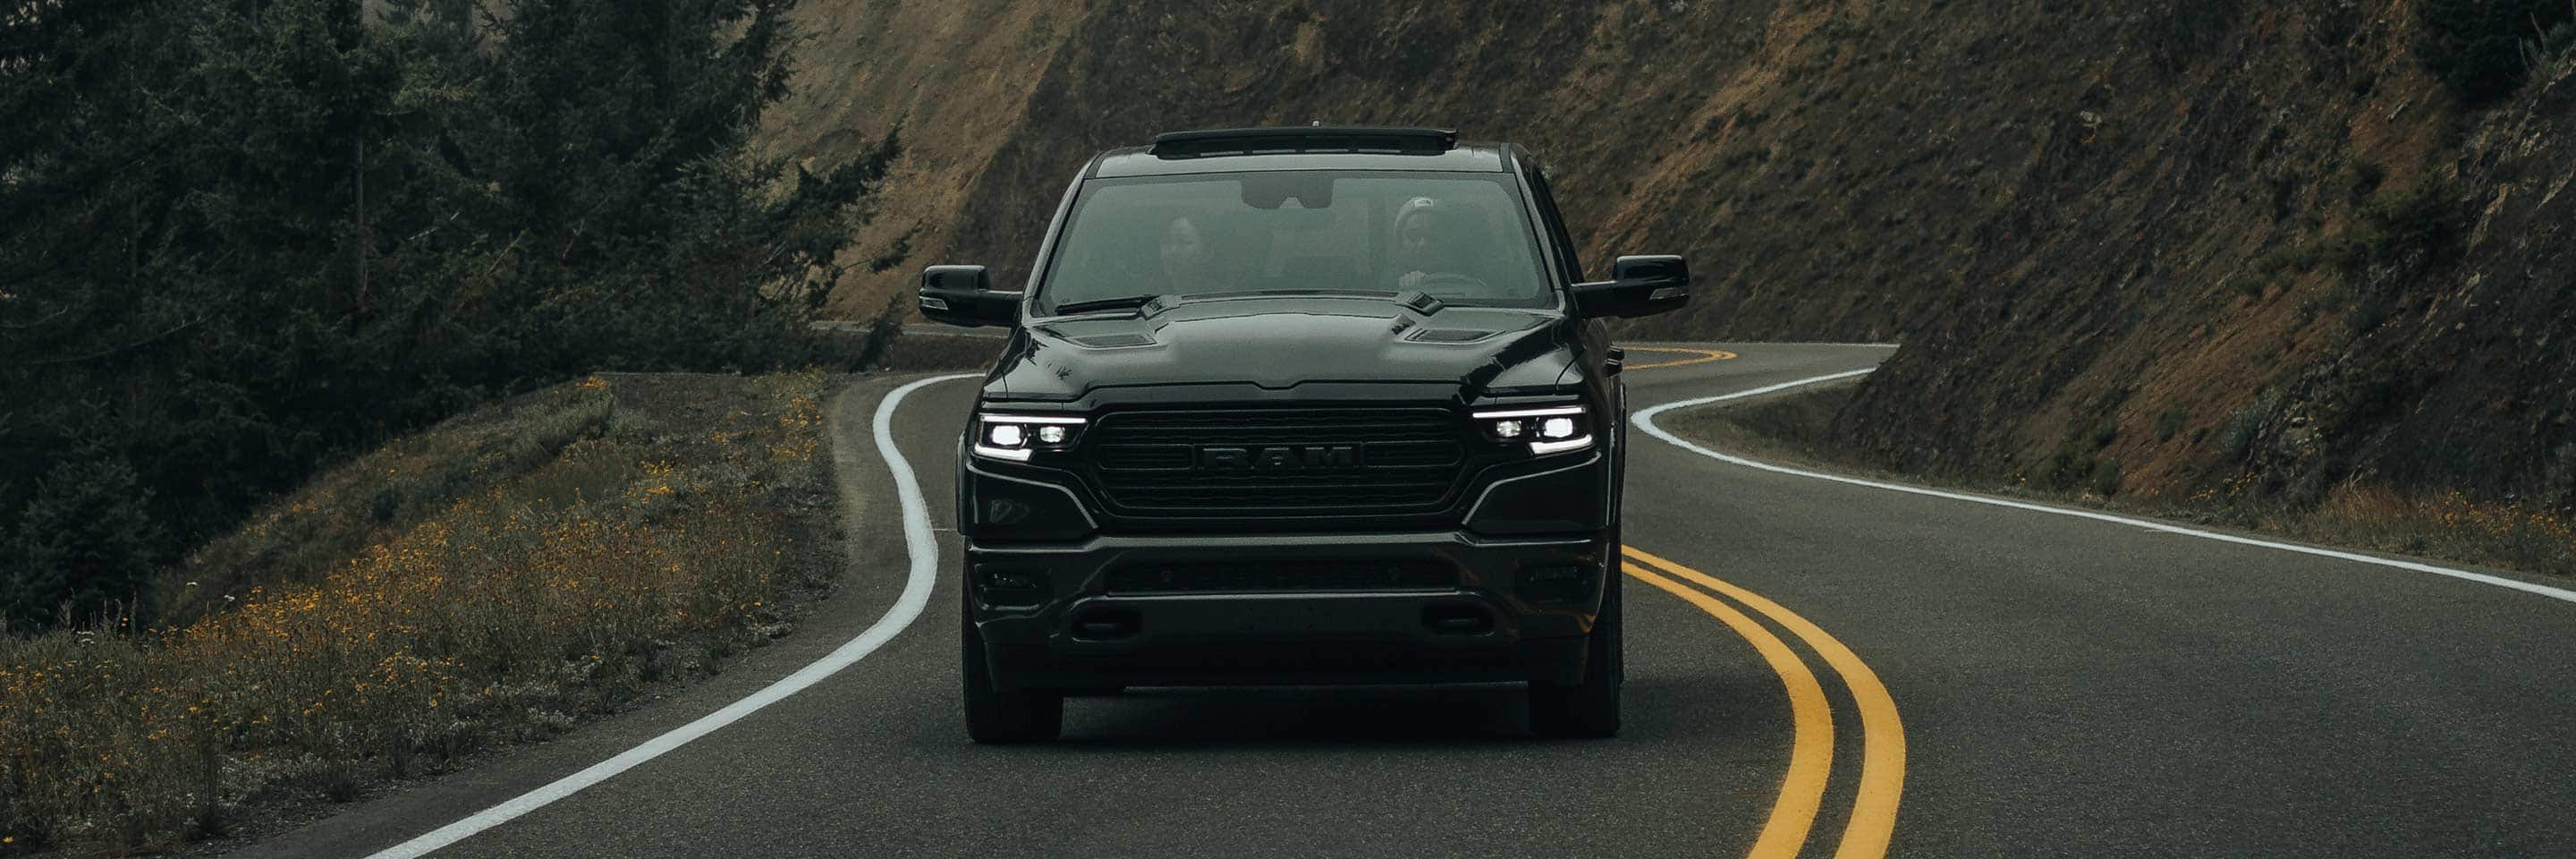 A head-on view of the 2023 Ram 1500 being driven on a winding mountain road.